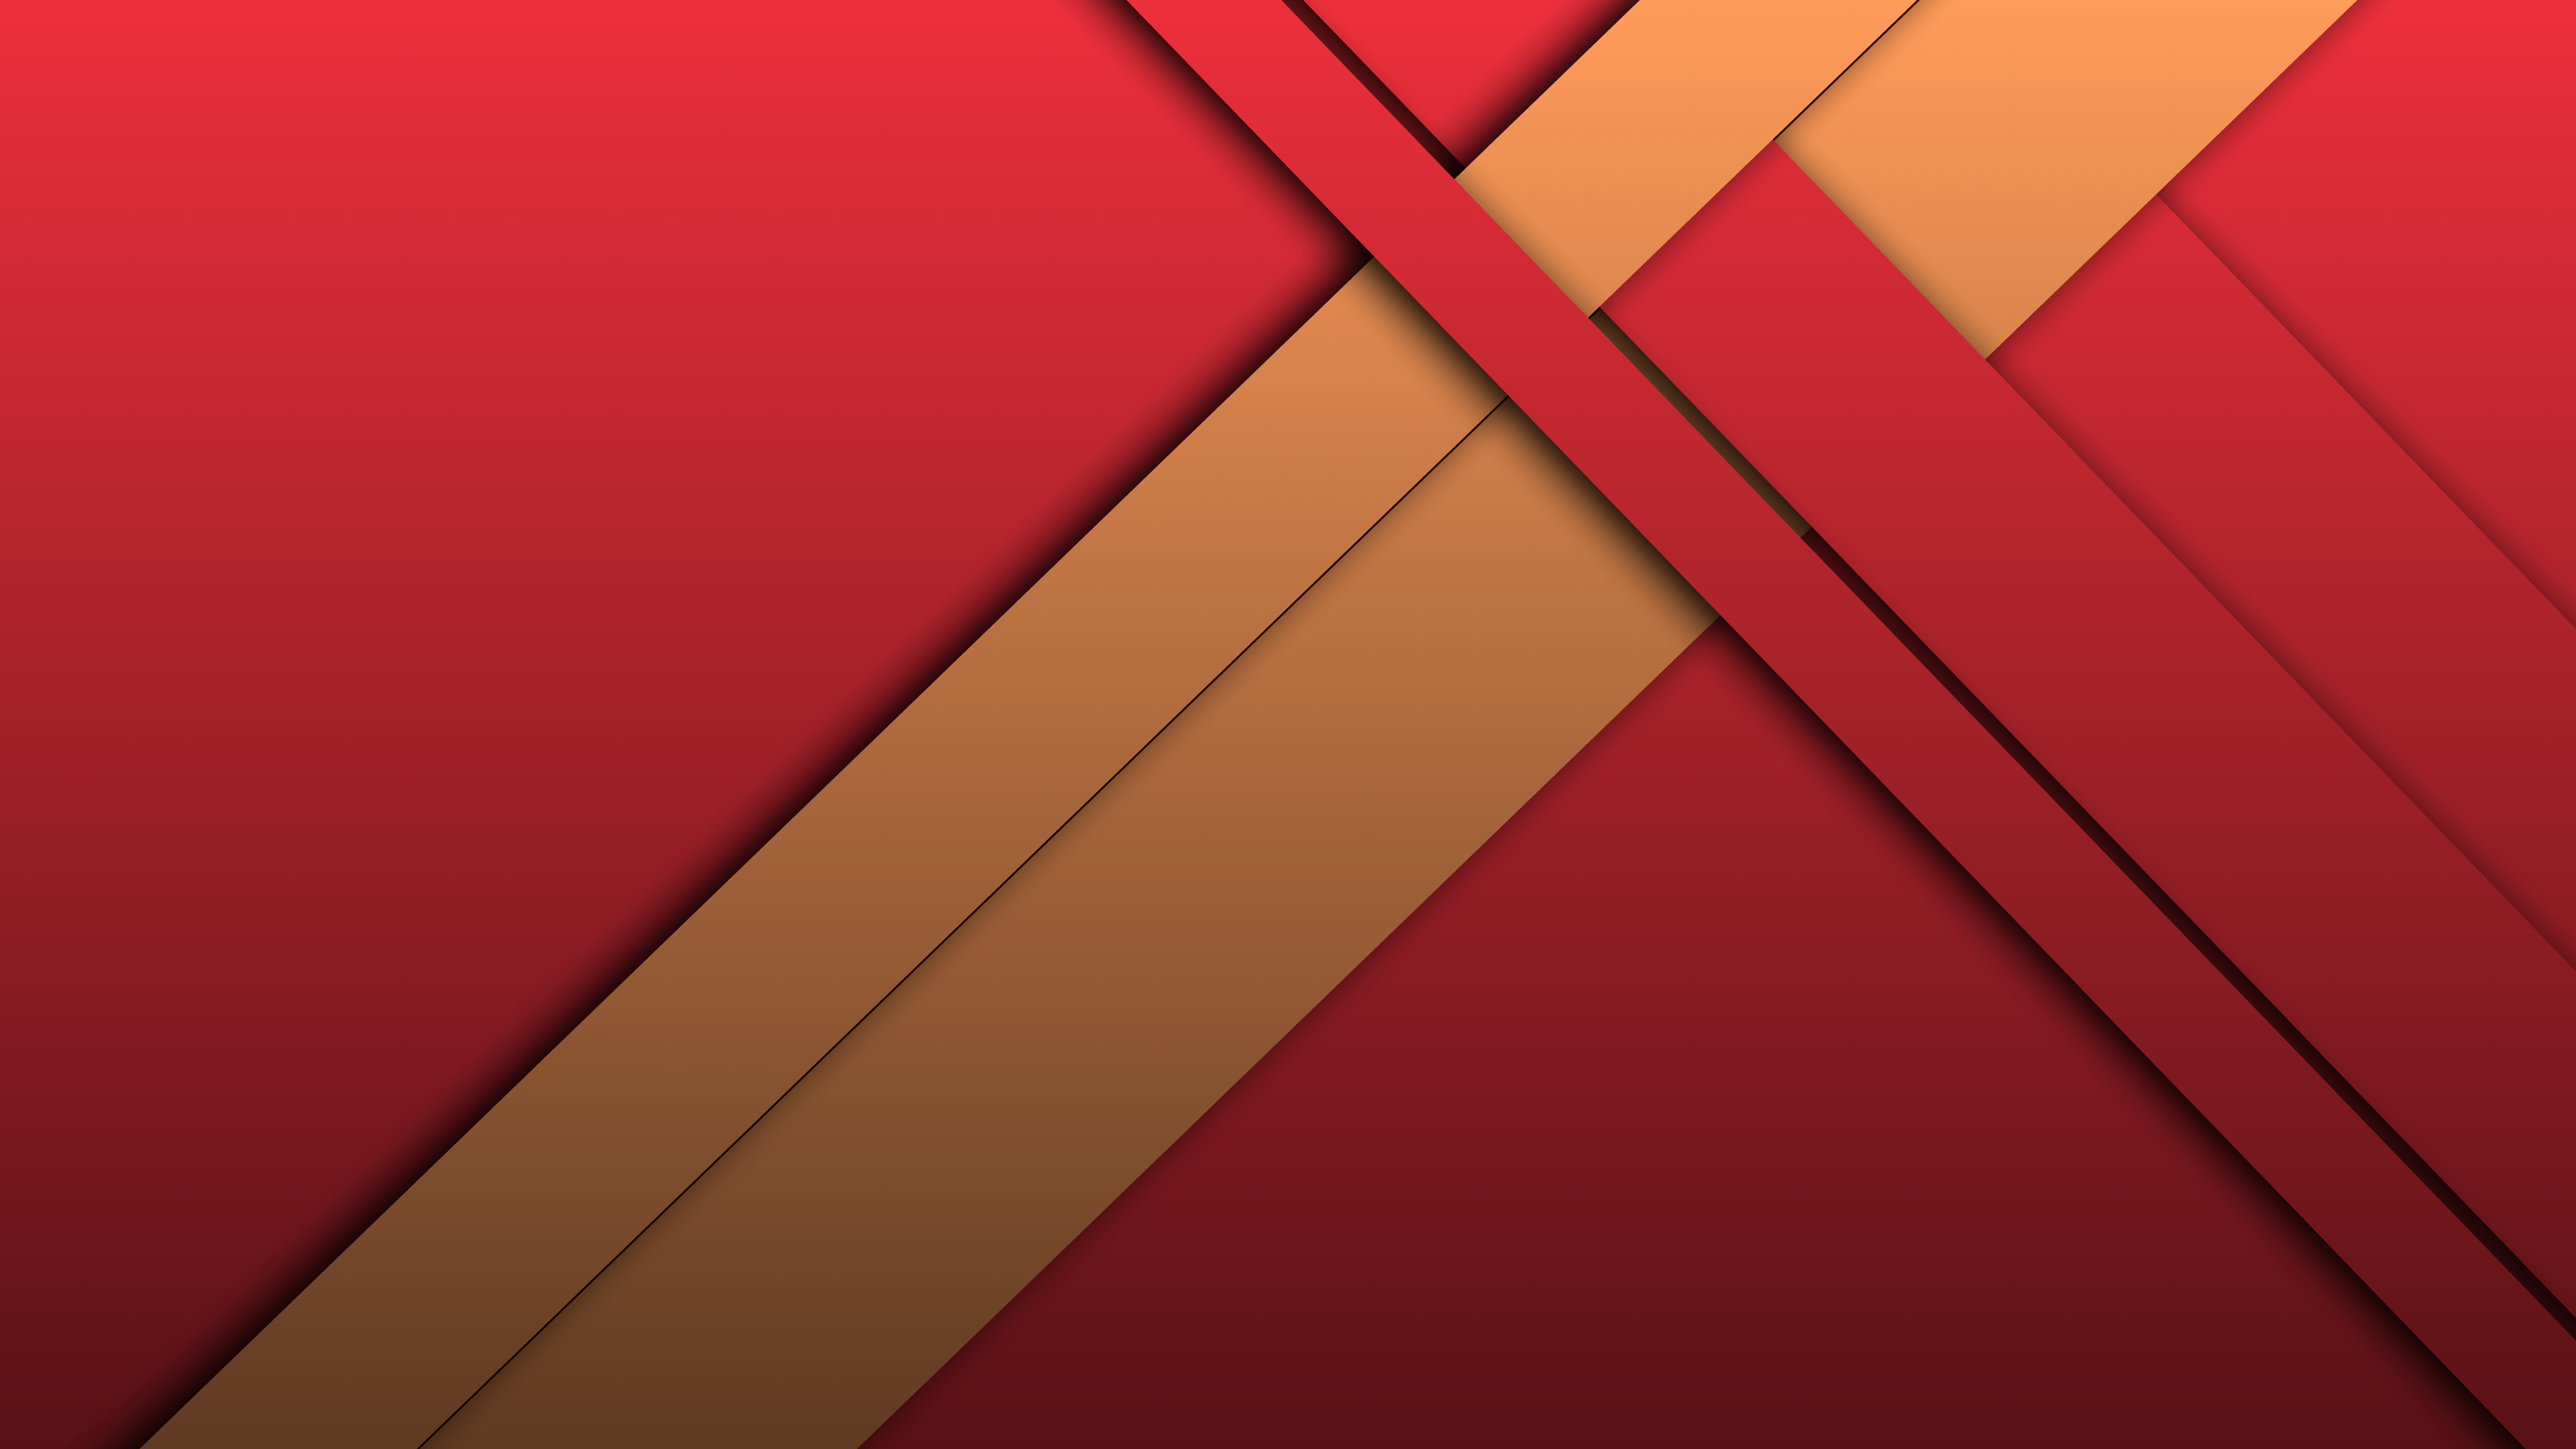 247 Background Abstract Red Gold - MyWeb